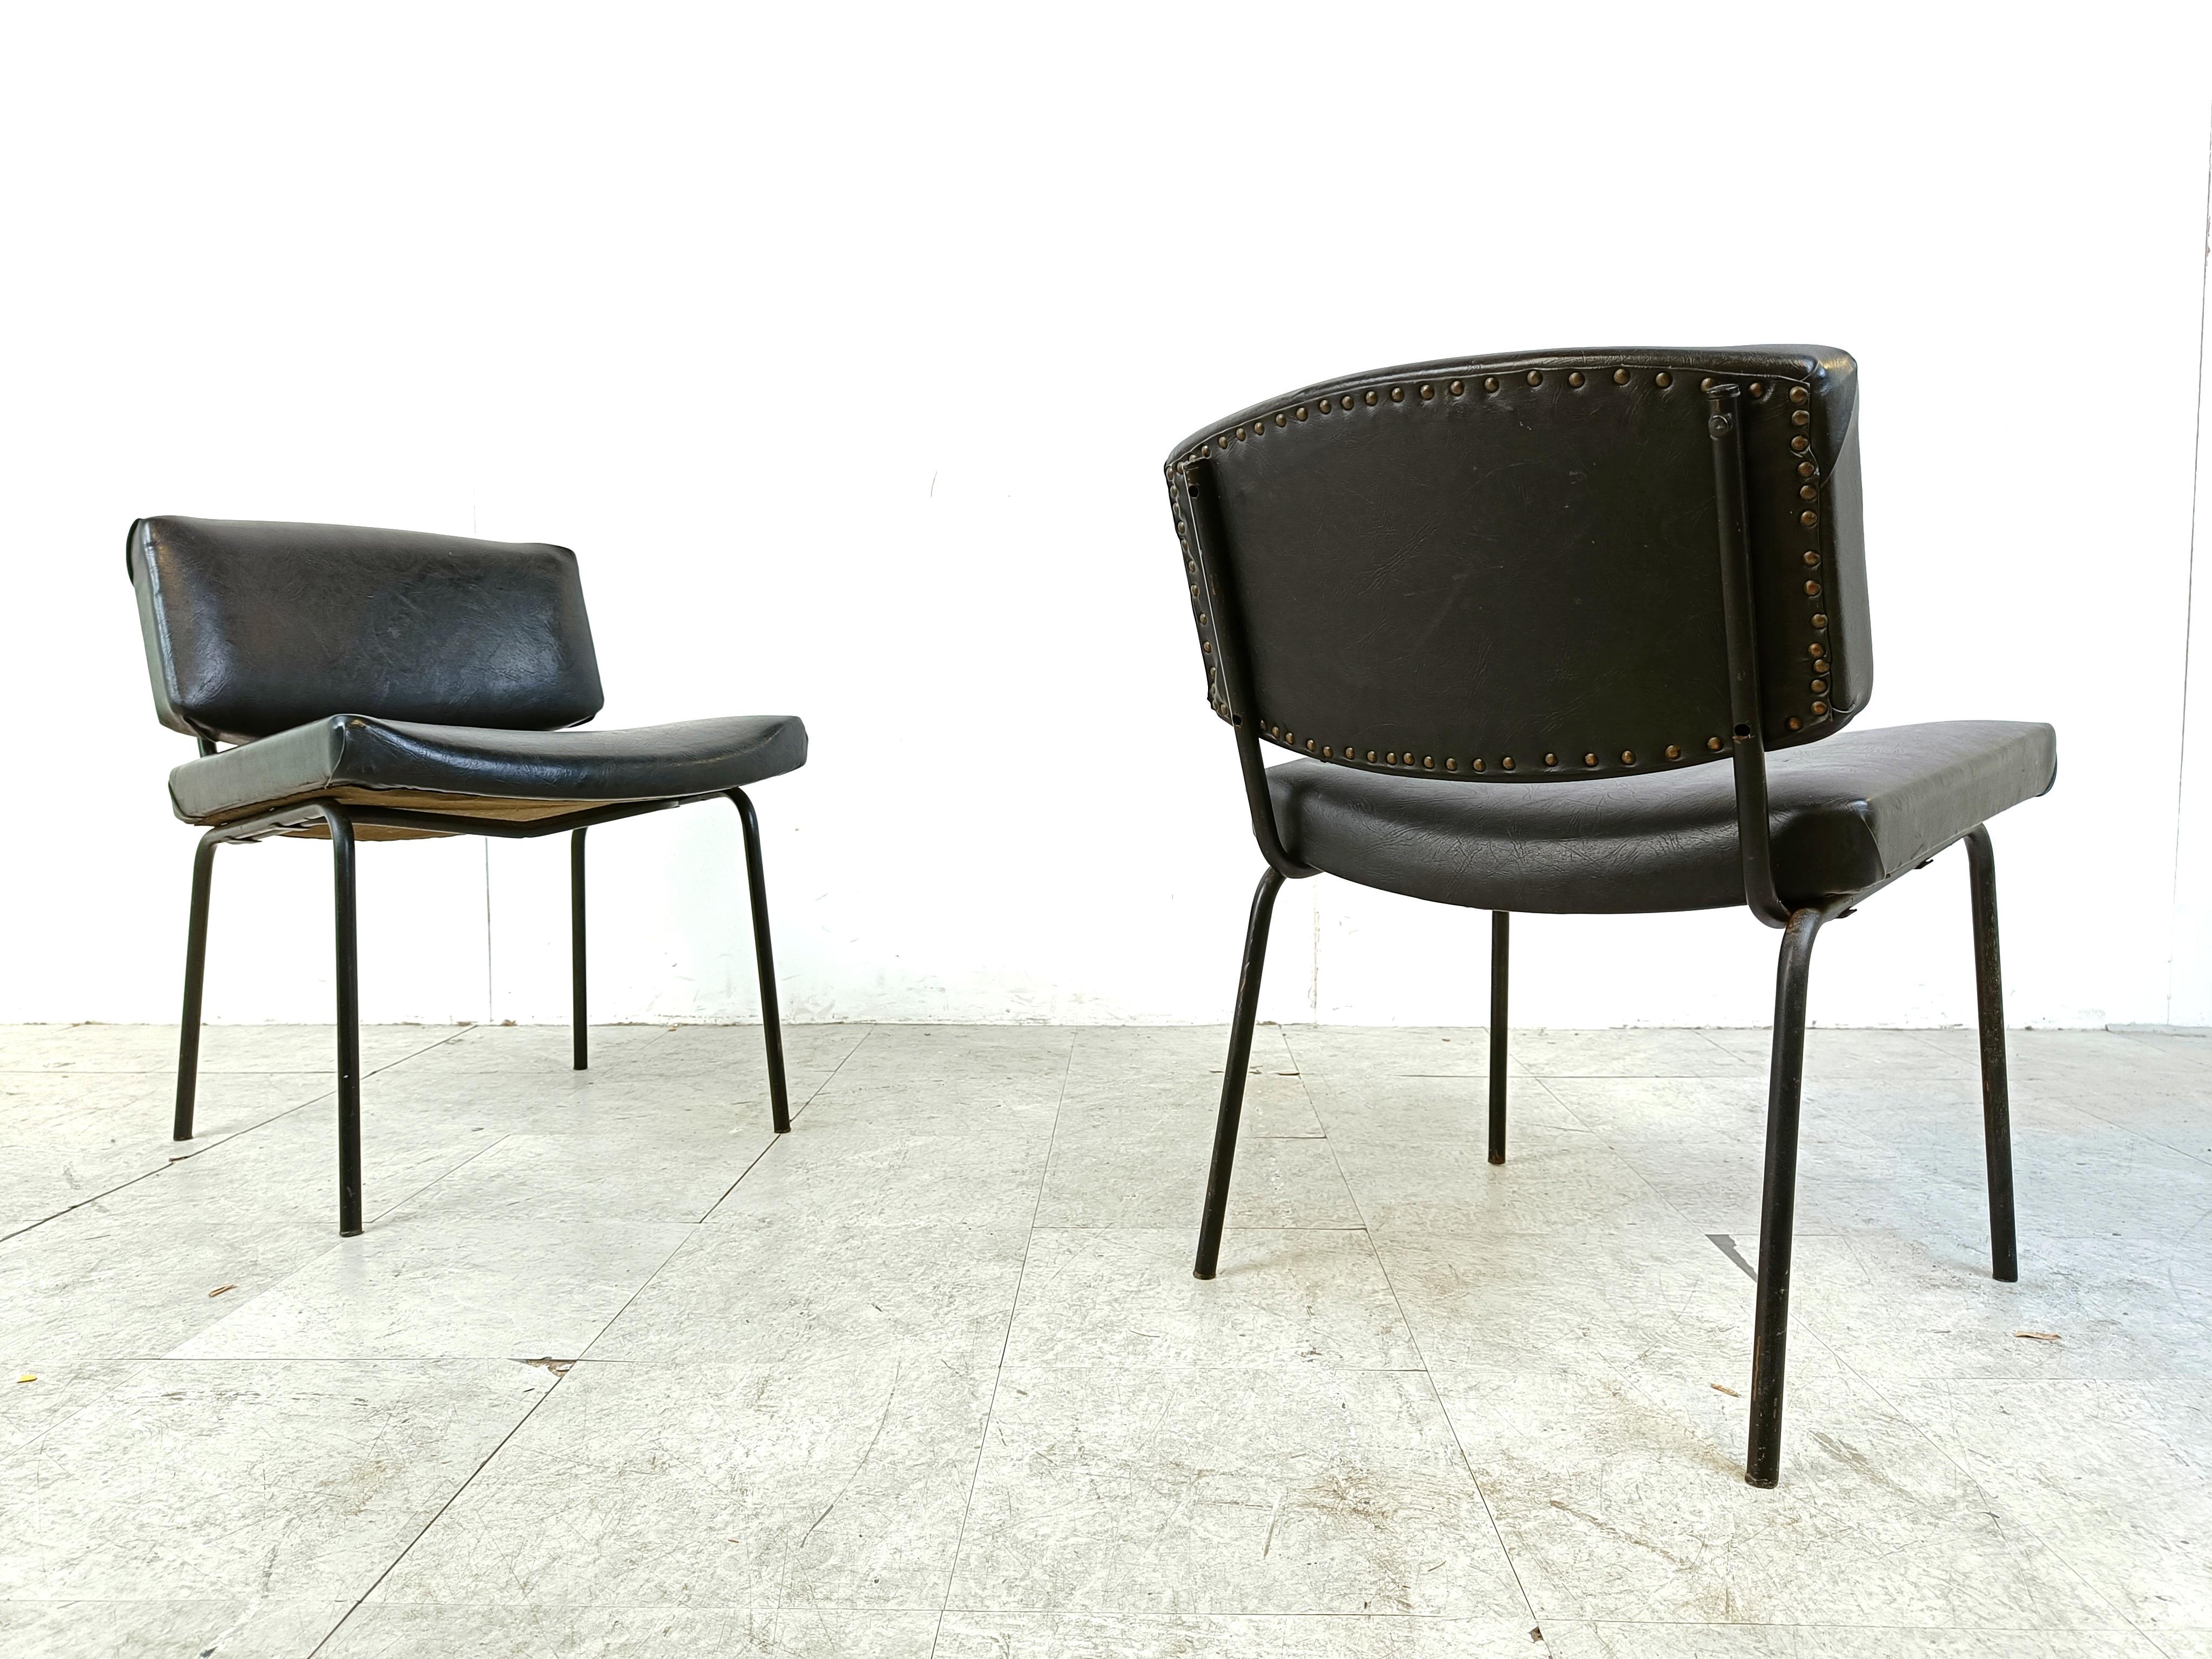 Mid-20th Century Vintage Conseil Chairs by Pierre Guariche 1950's, France For Sale